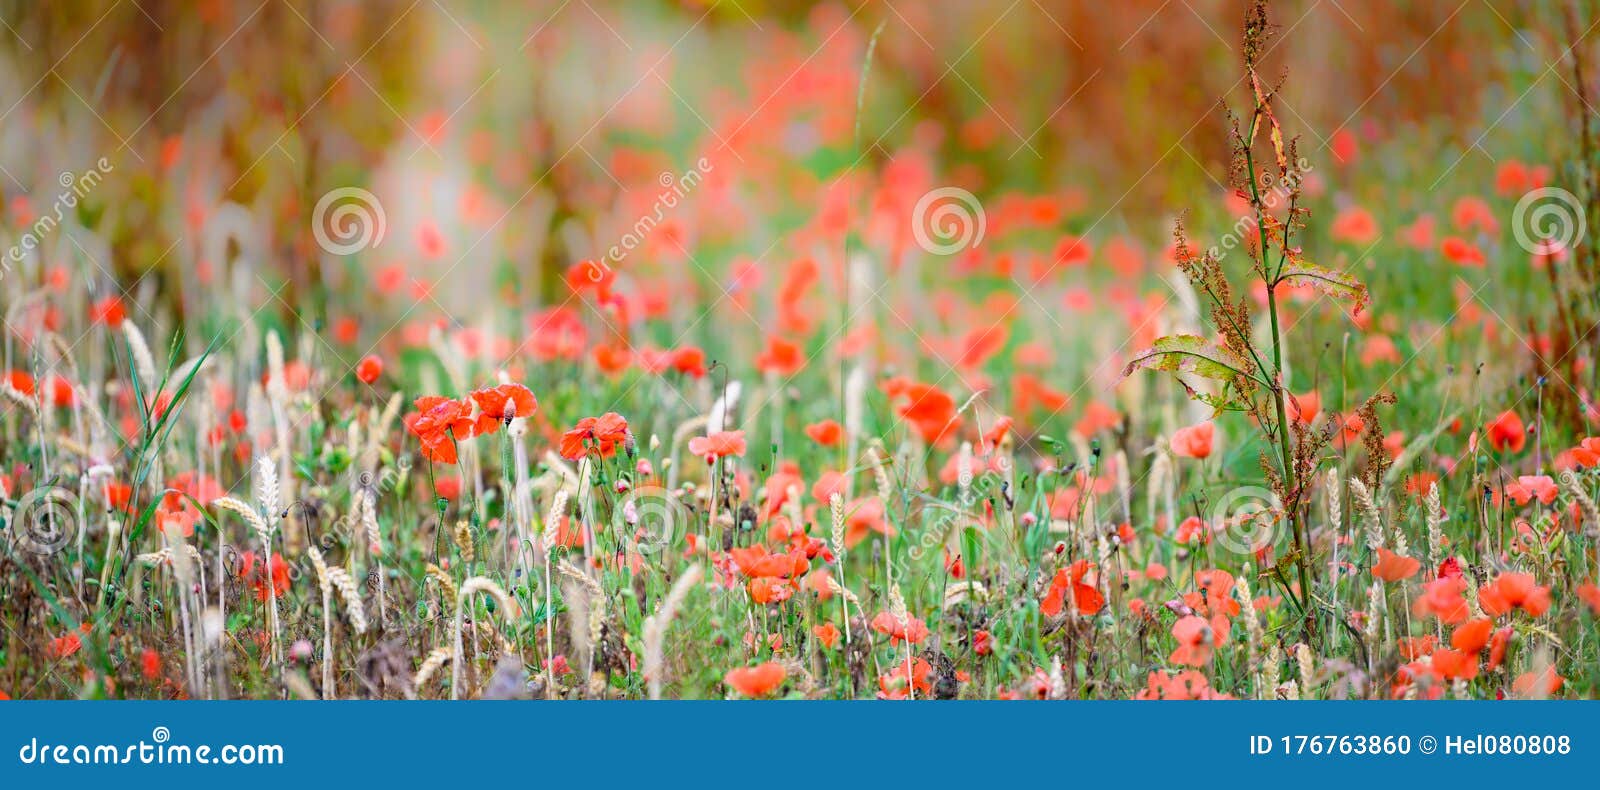 poppies flowering on field edge, wild flowers and herbs. not with pesticides sprayed field edge. untreated nature.